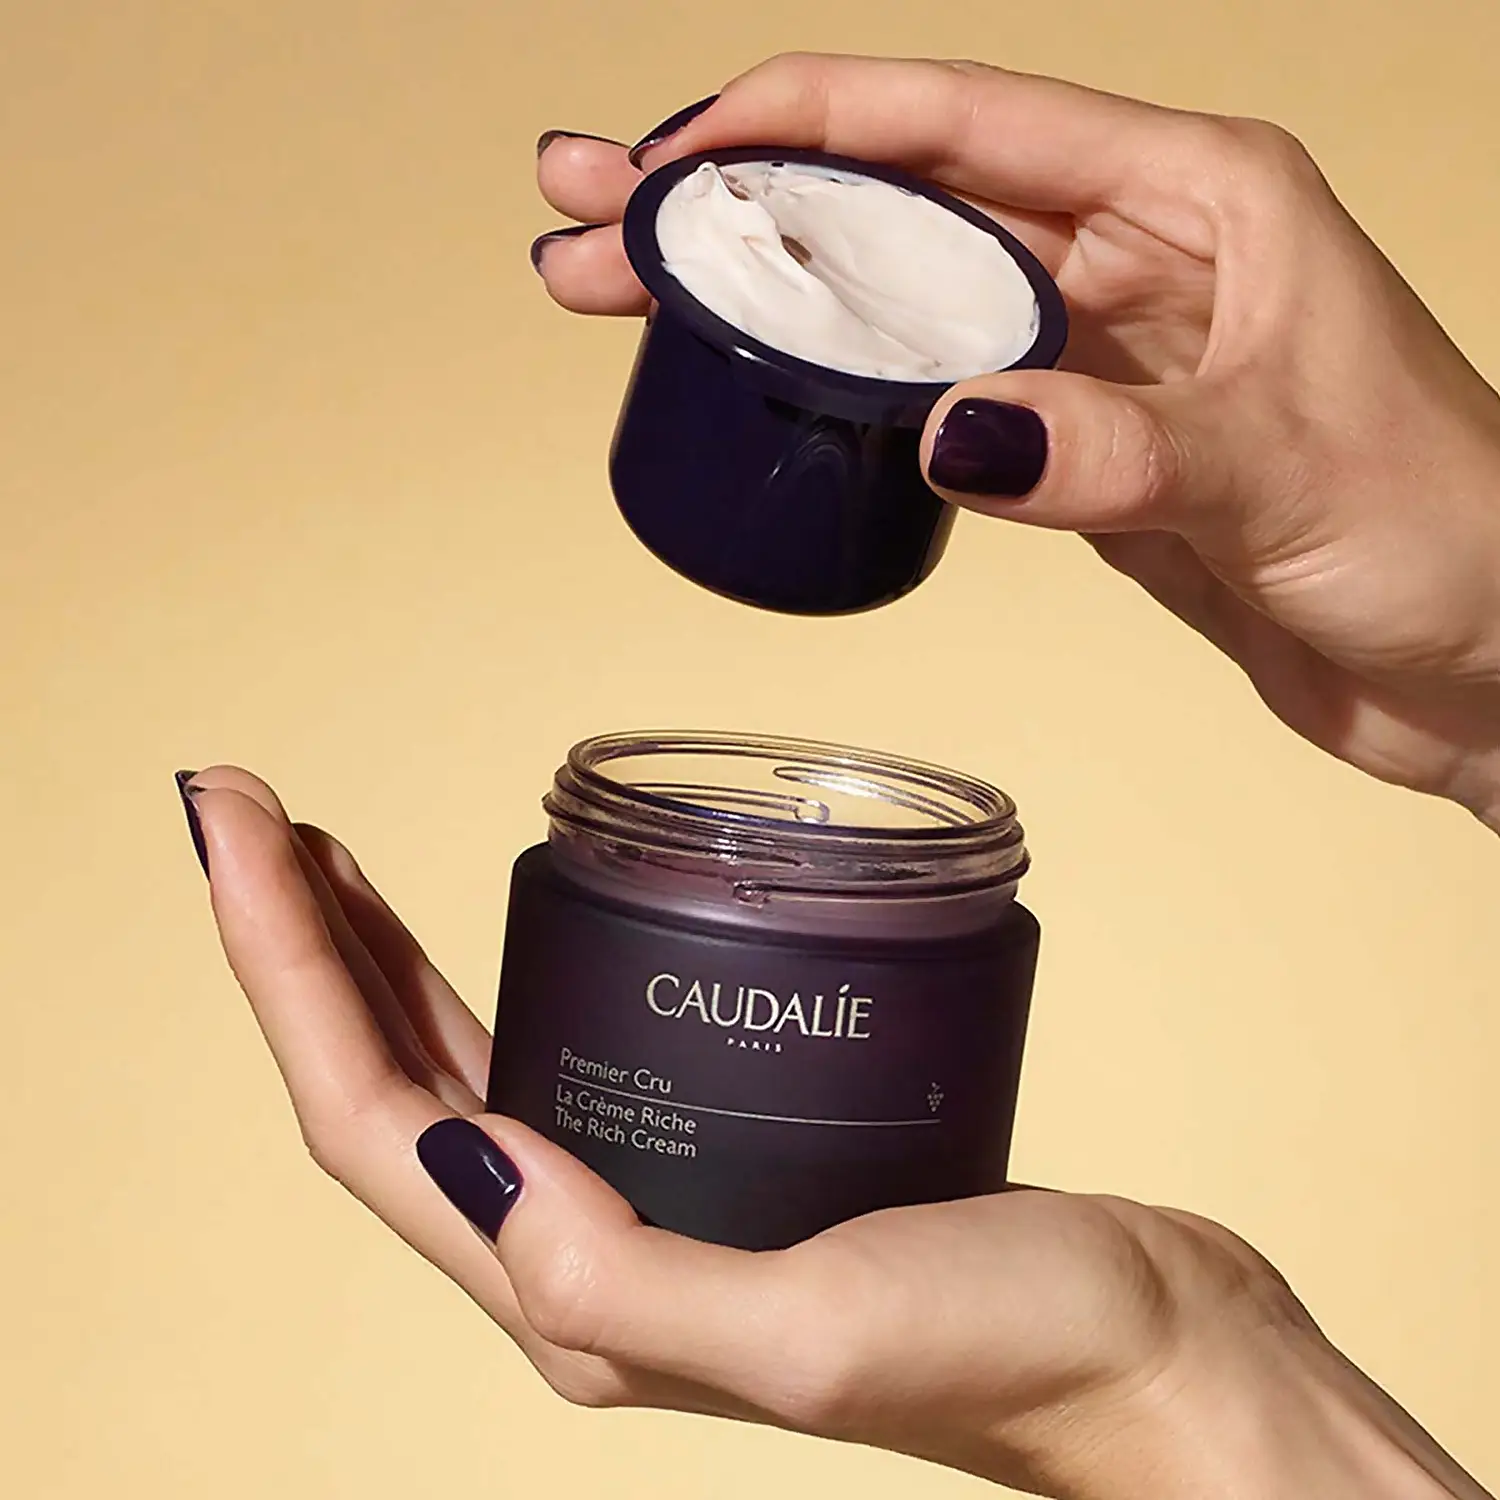 Discover the Power of Caudalie's Deeply Nourishing Anti-Ageing Cream for Youthful, Radiant Skin